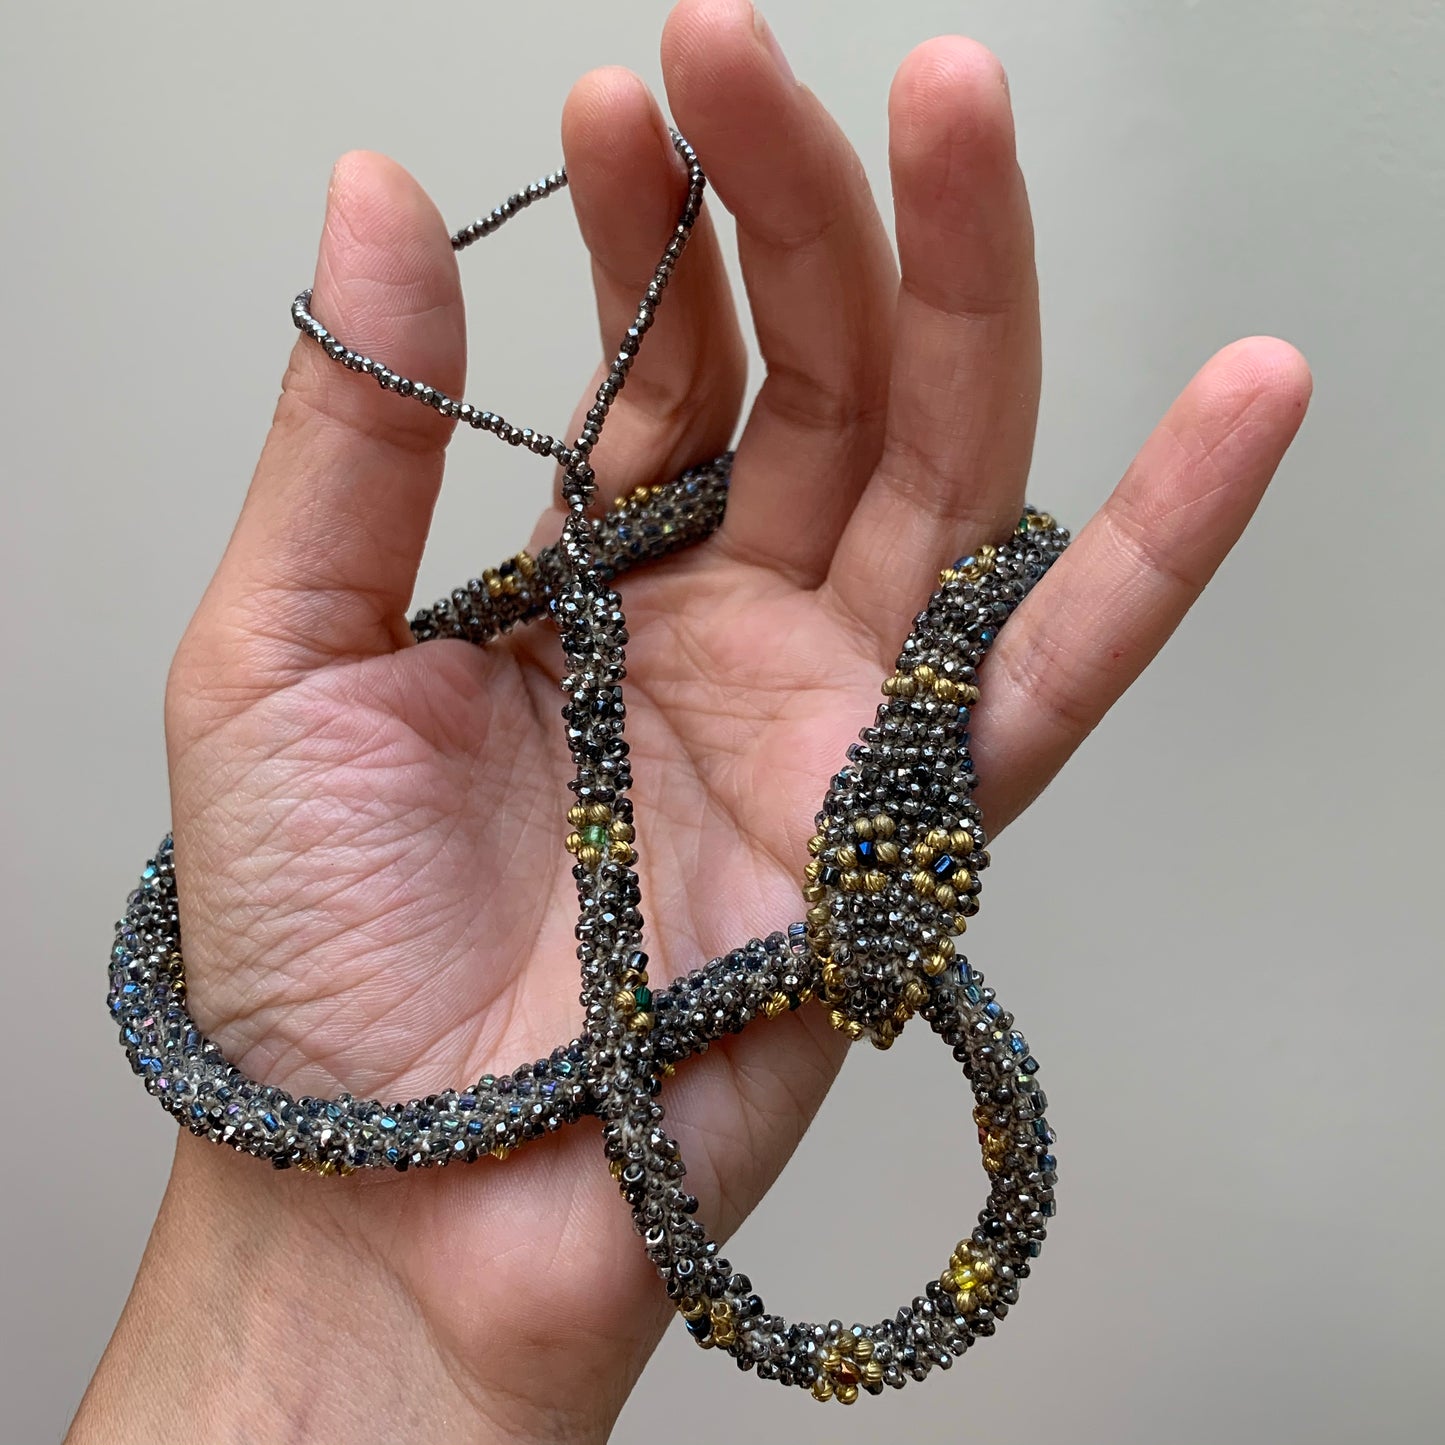 Bead Crochet Snake Necklace | Antique steel cut, Torse and glass beads